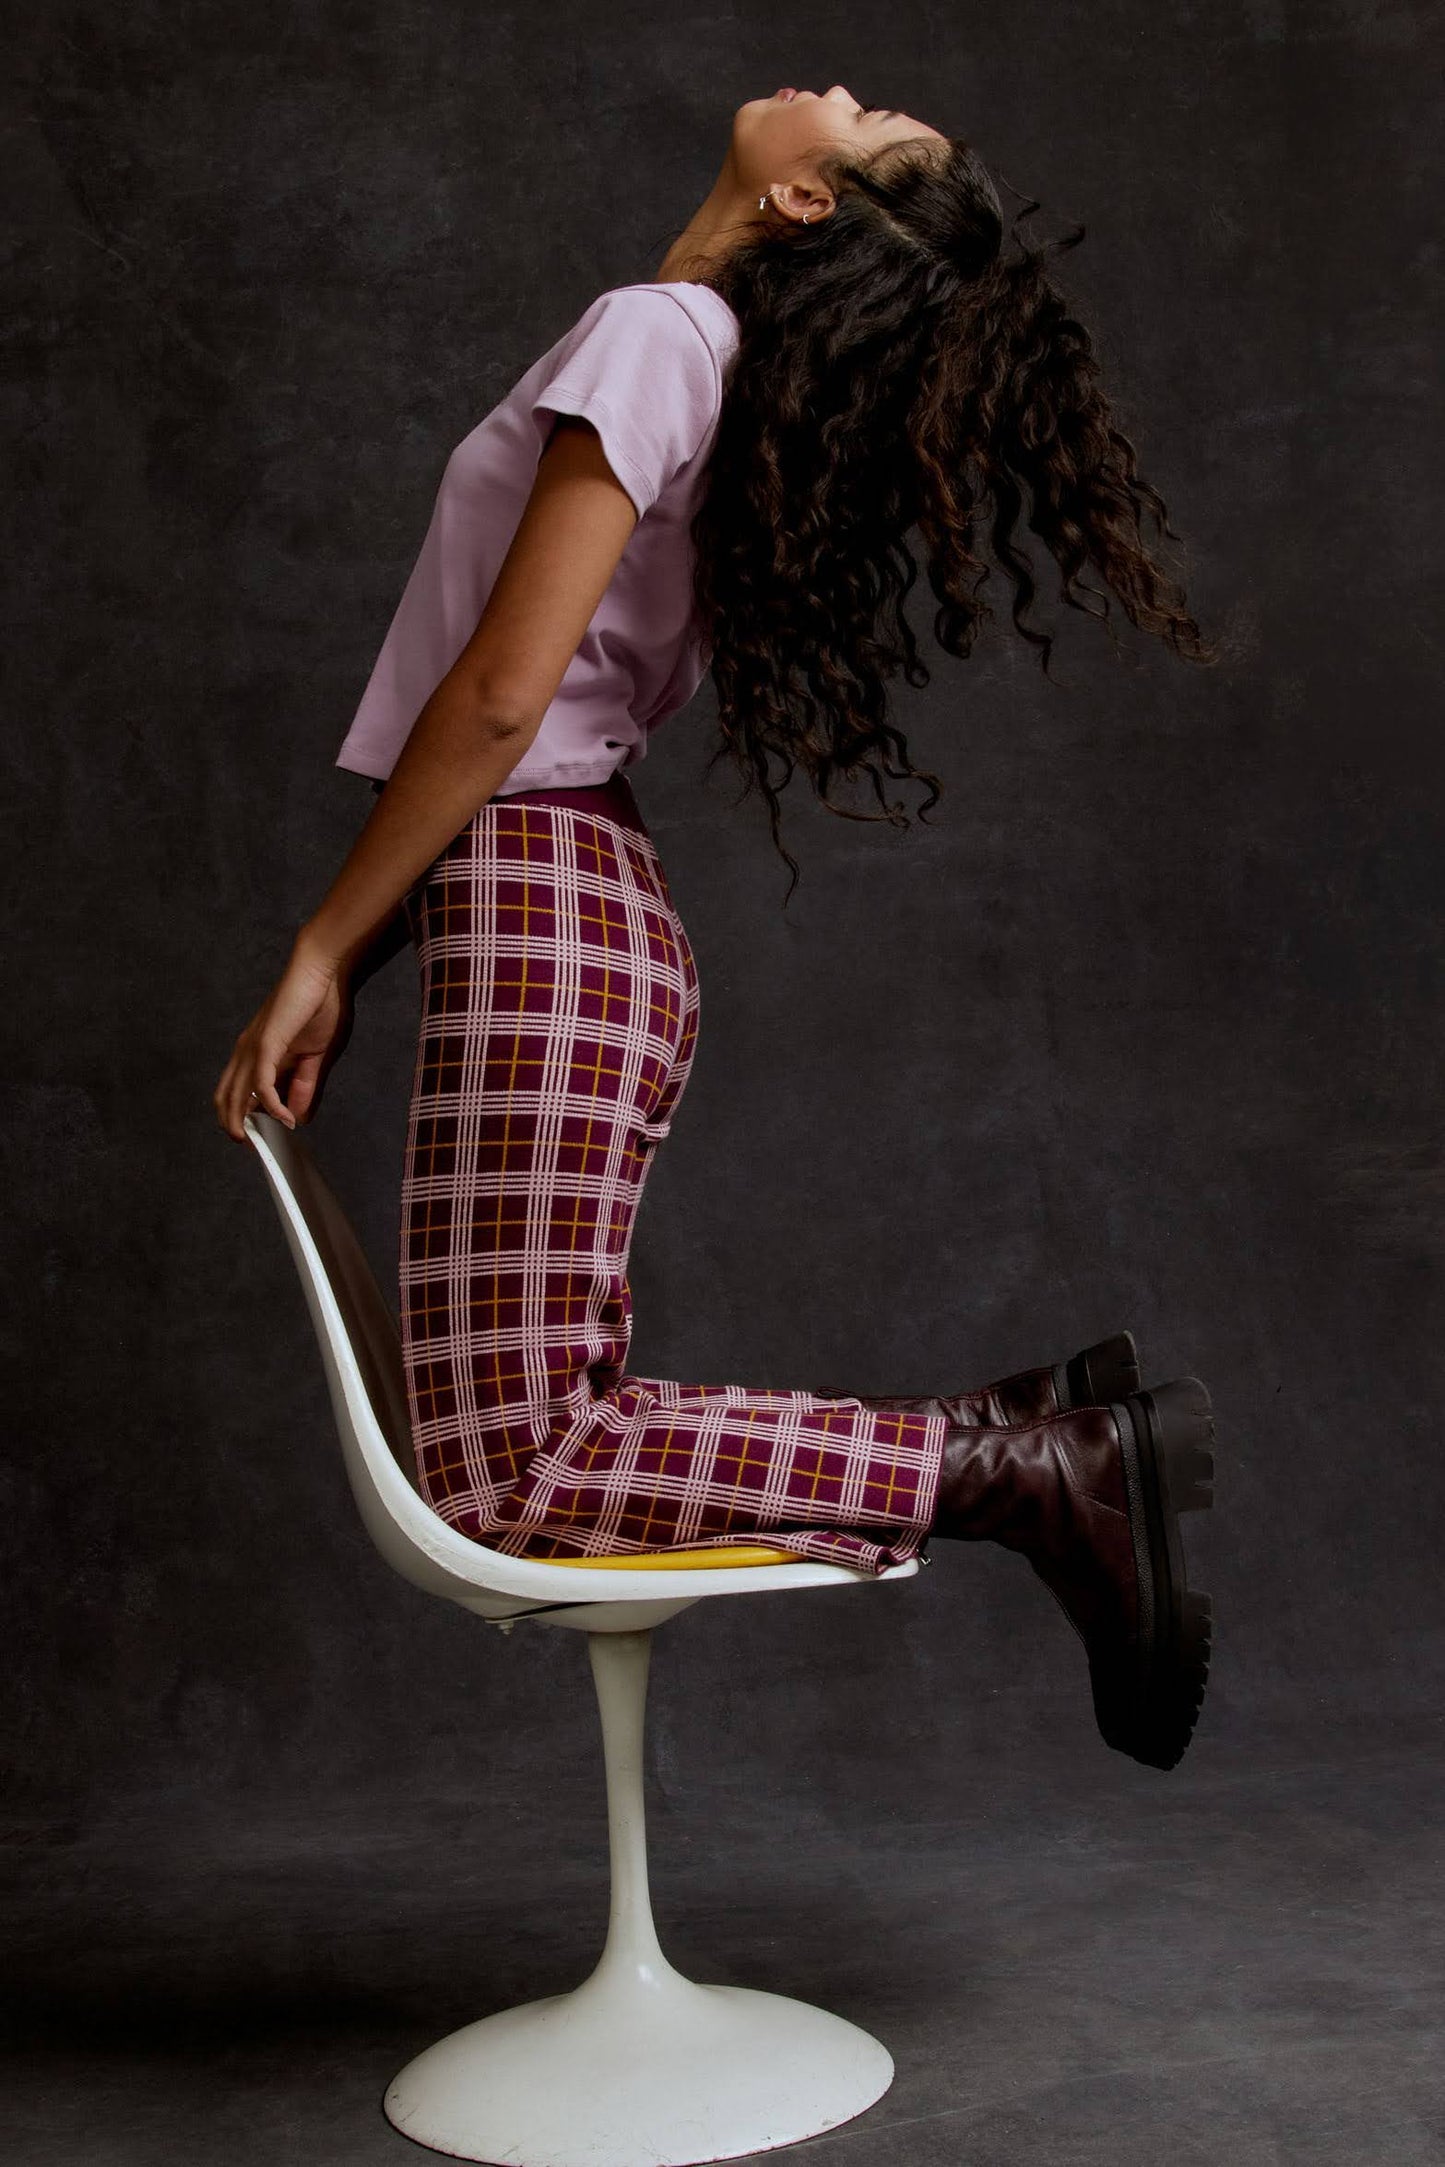 model on chair